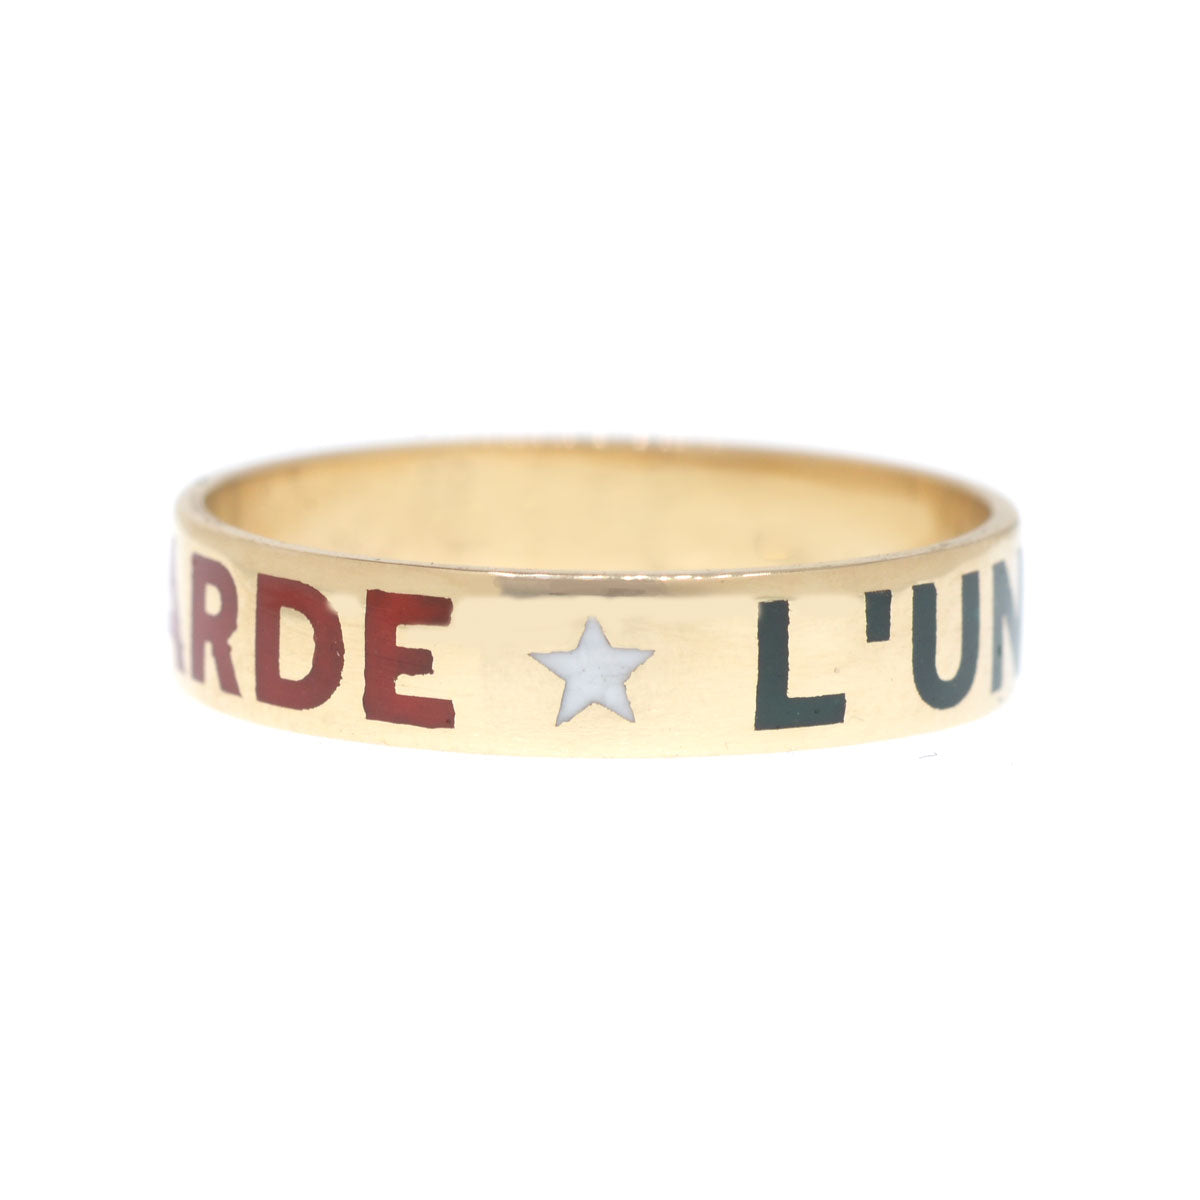 L'Univers Vous Garde Band Ring